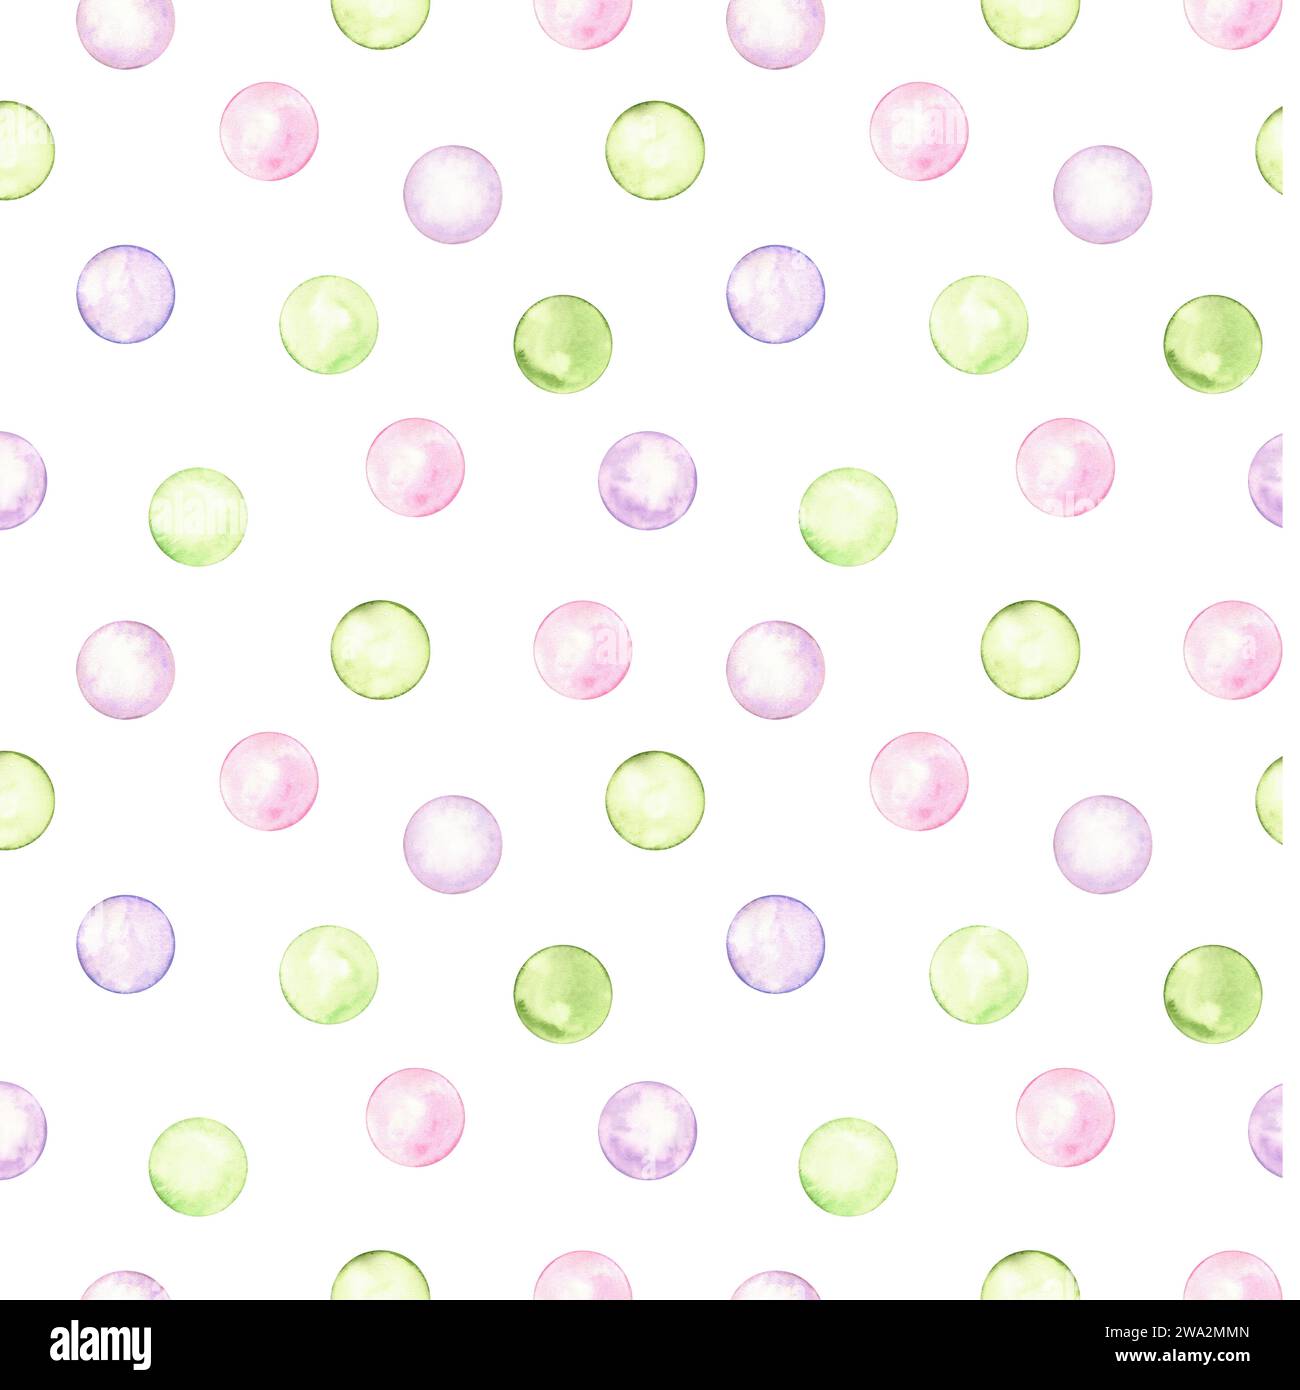 Abstract seamless polka dot pattern. Circle in soft pastel colors. Creative minimalist style. Splashes, bubbles, round doodle spots, brush strokes Stock Photo